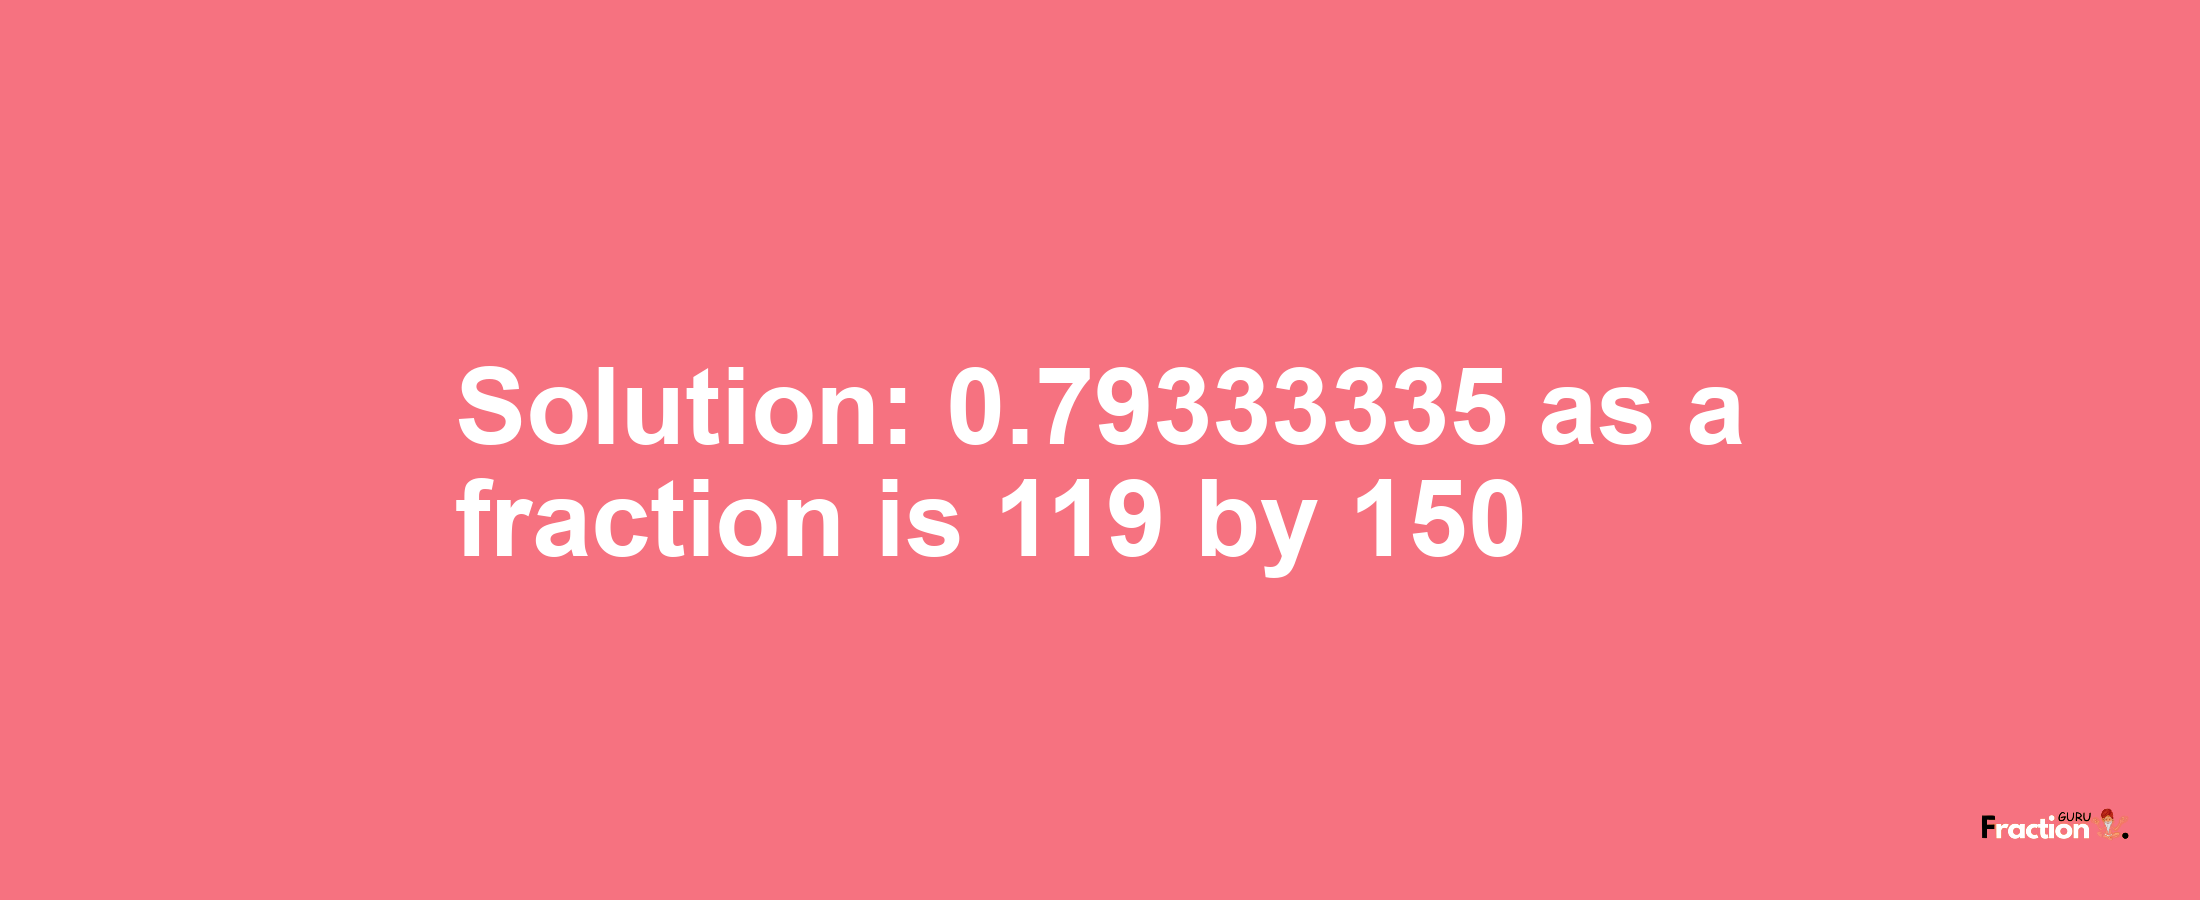 Solution:0.79333335 as a fraction is 119/150